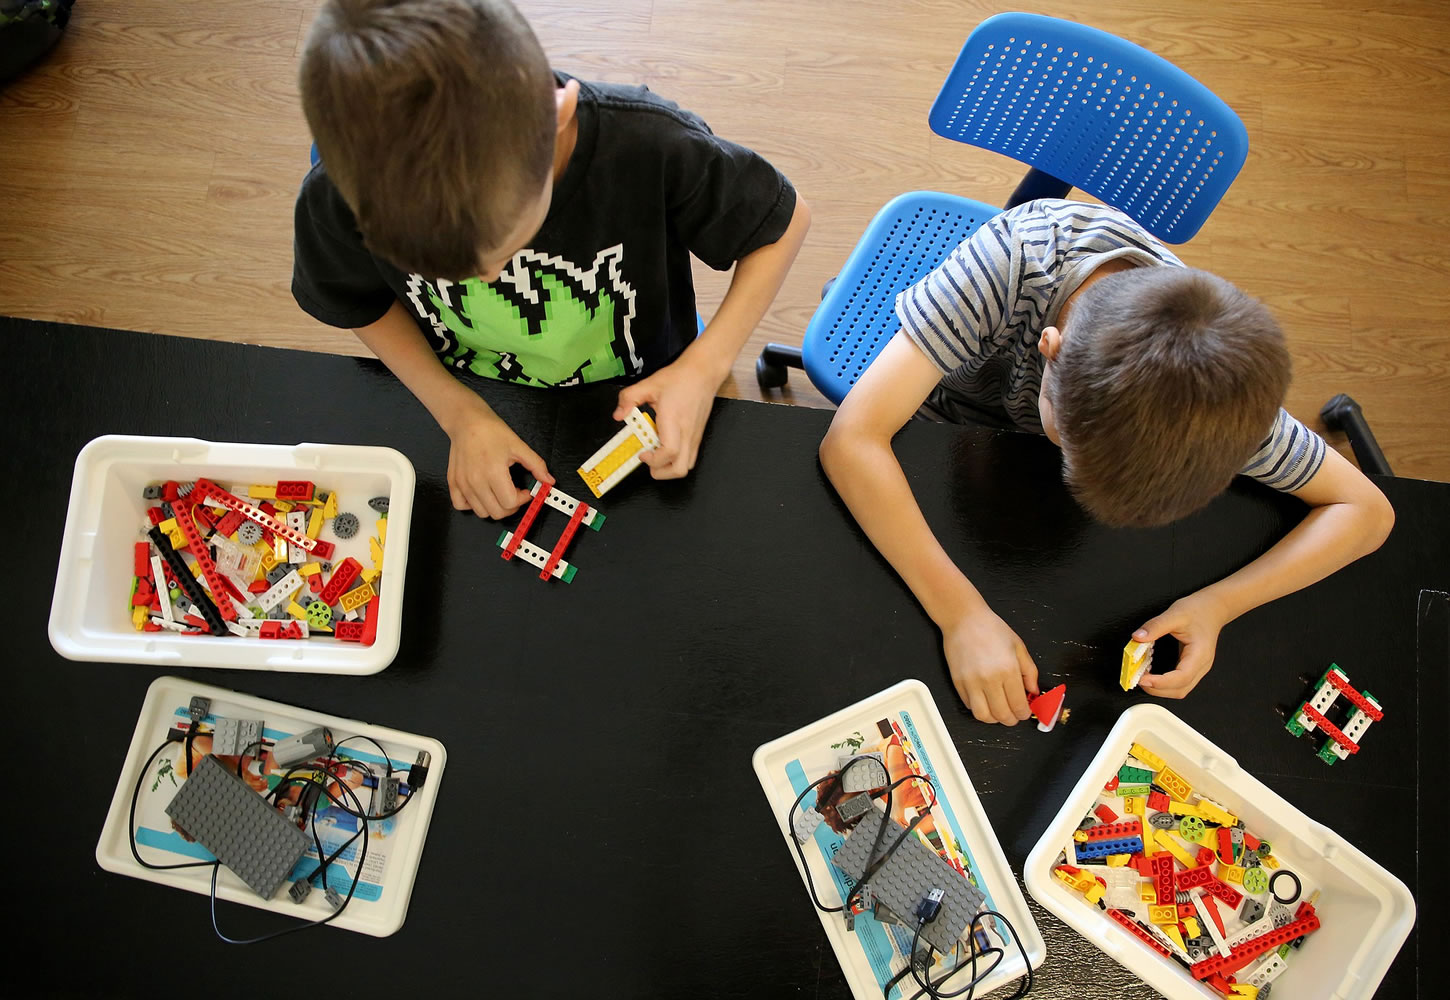 William Lerner, left, and William Kaegi learn coding skills while building a Lego robotic alligator during a sports-coding summer camp on June 16 in Oak Park, Ill.